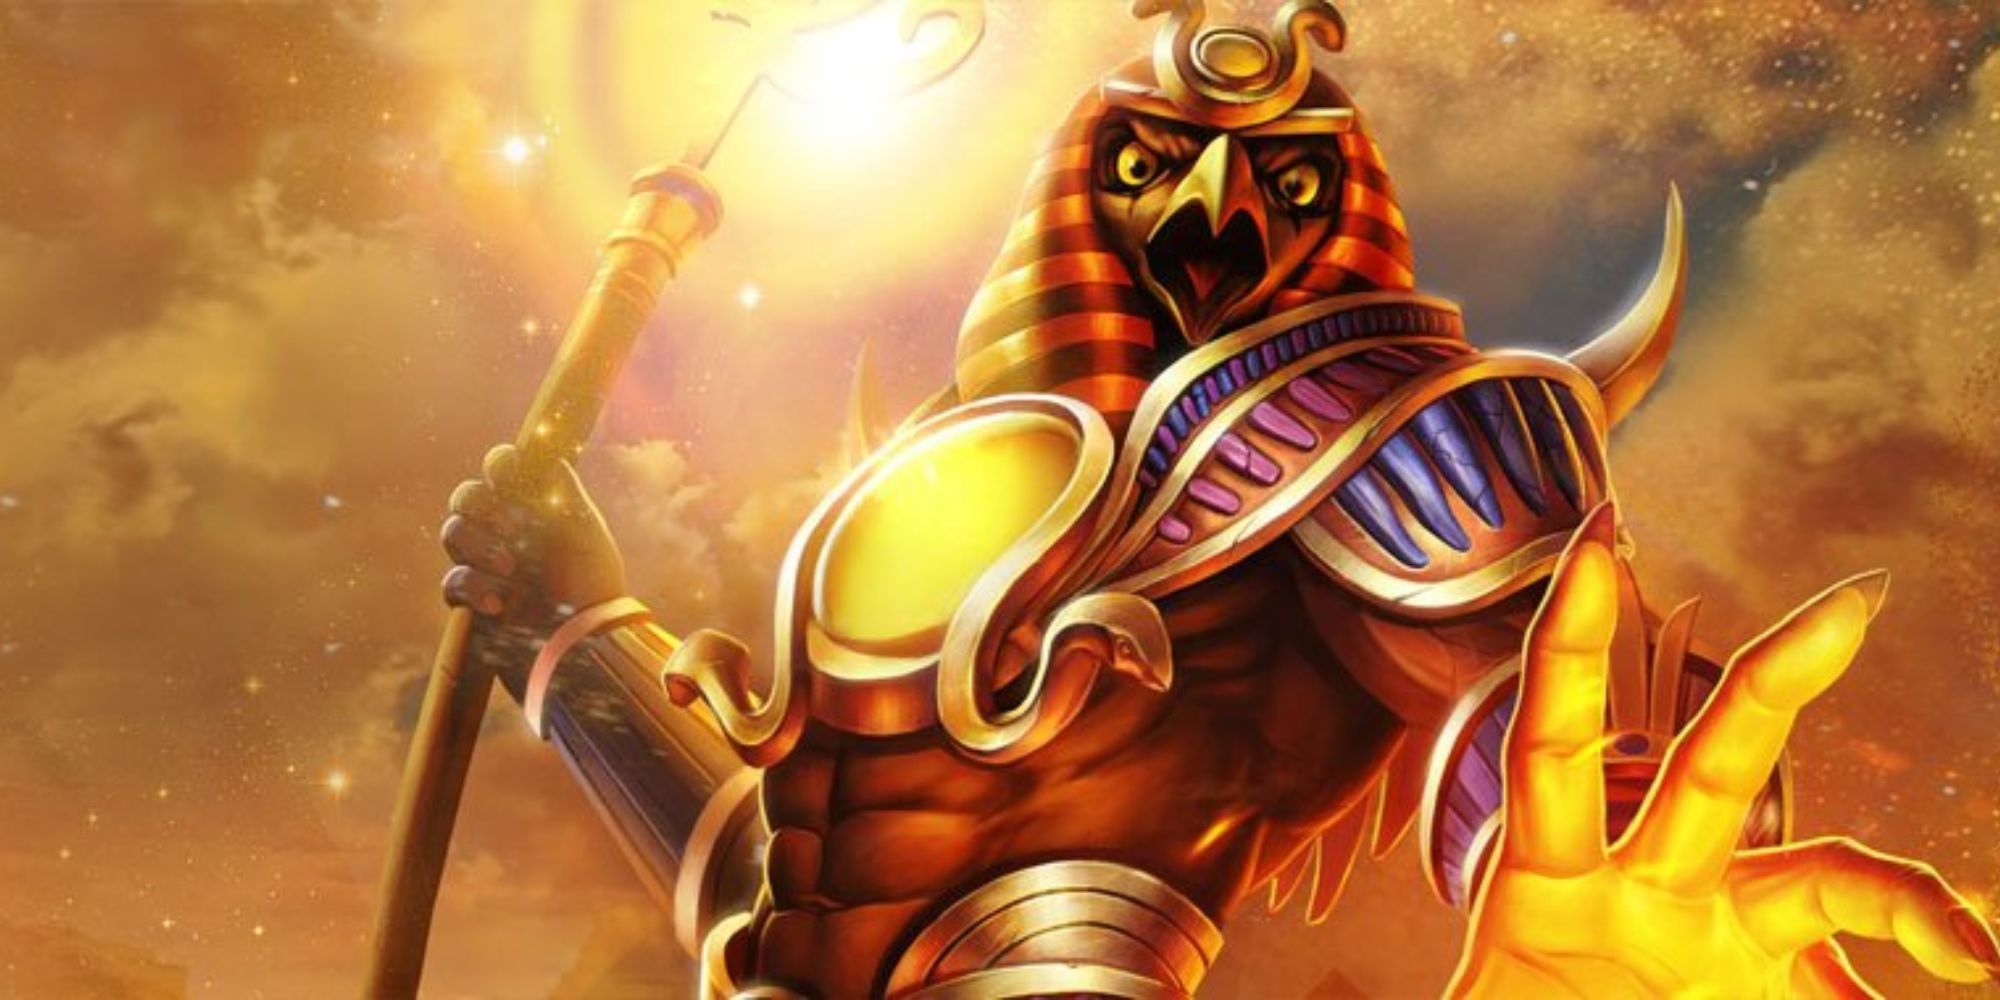 Ra Smite god official artwork powerful pose weapon in hand